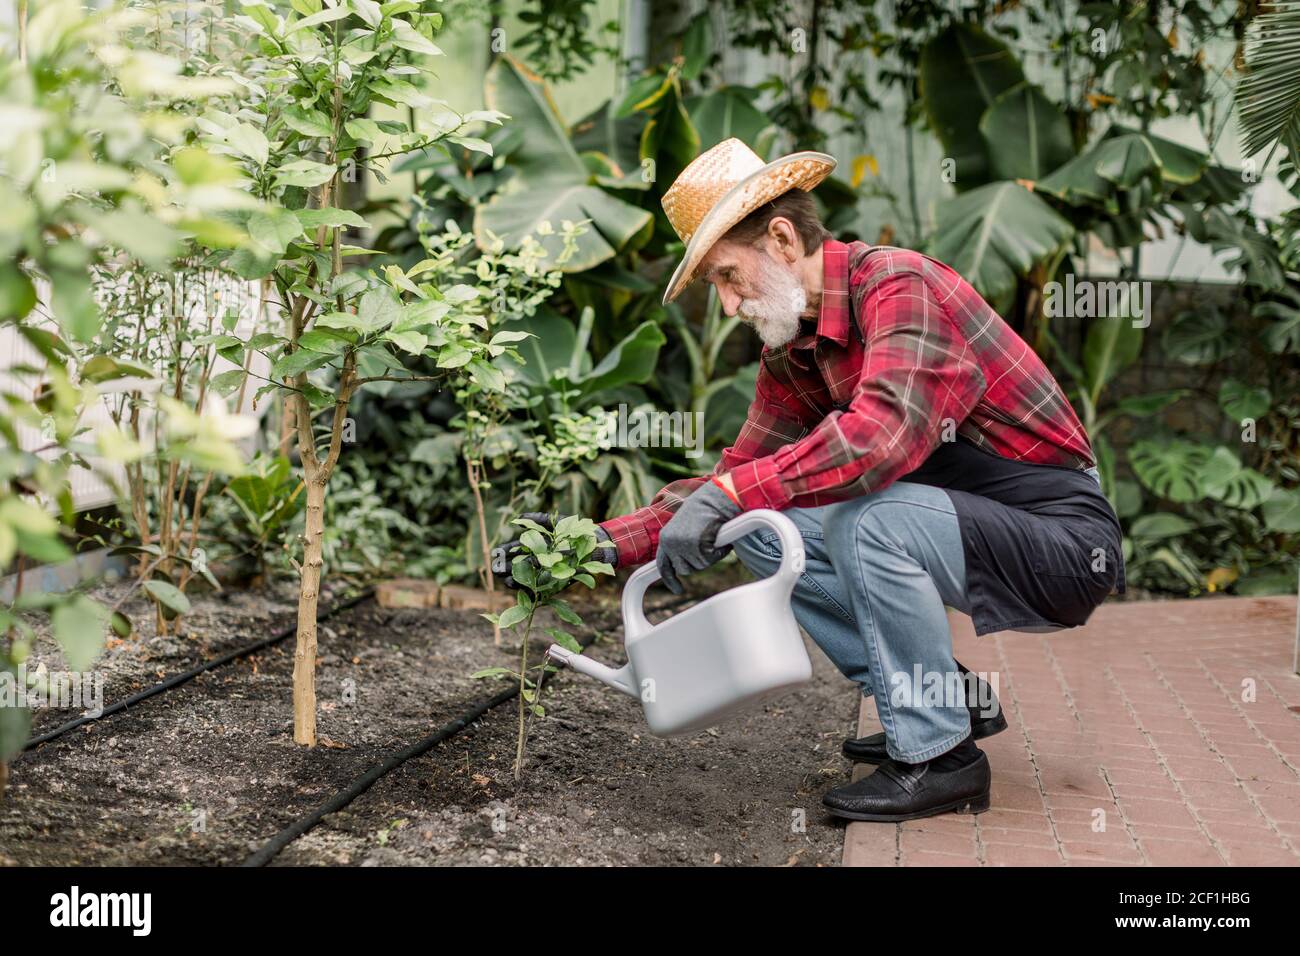 https://c8.alamy.com/comp/2CF1HBG/portrait-of-senior-bearded-man-gardener-wearing-protective-gloves-straw-hat-and-working-clothes-in-the-process-of-planting-and-watering-little-tree-2CF1HBG.jpg